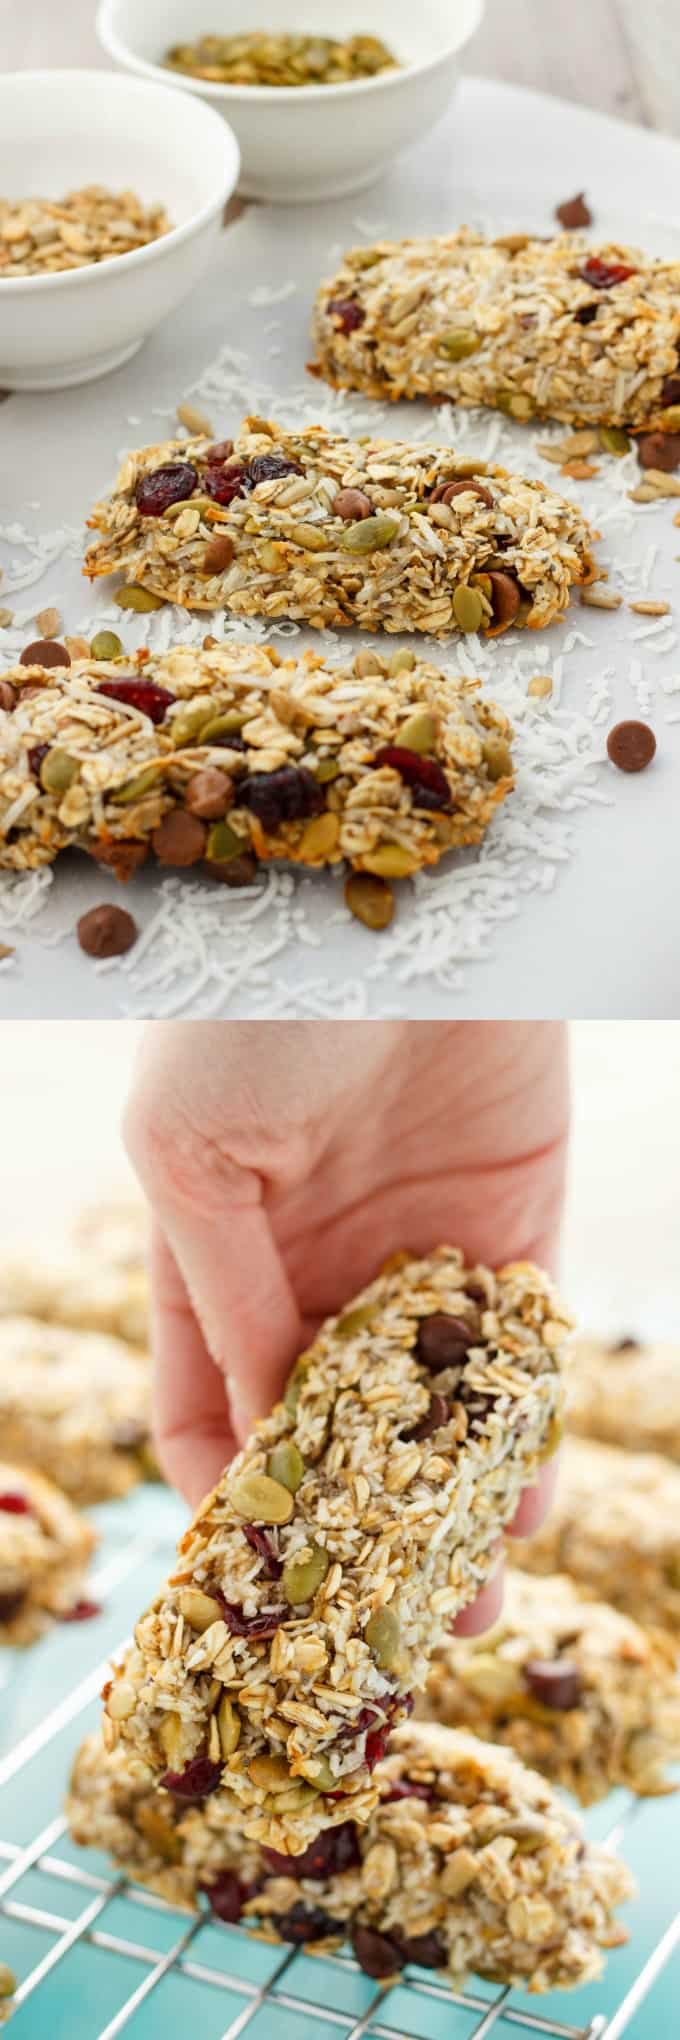 Three Ingredient Banana Granola Bars on white table with ingredients in white bowls, granola bars on baking grid and one bar held by hand